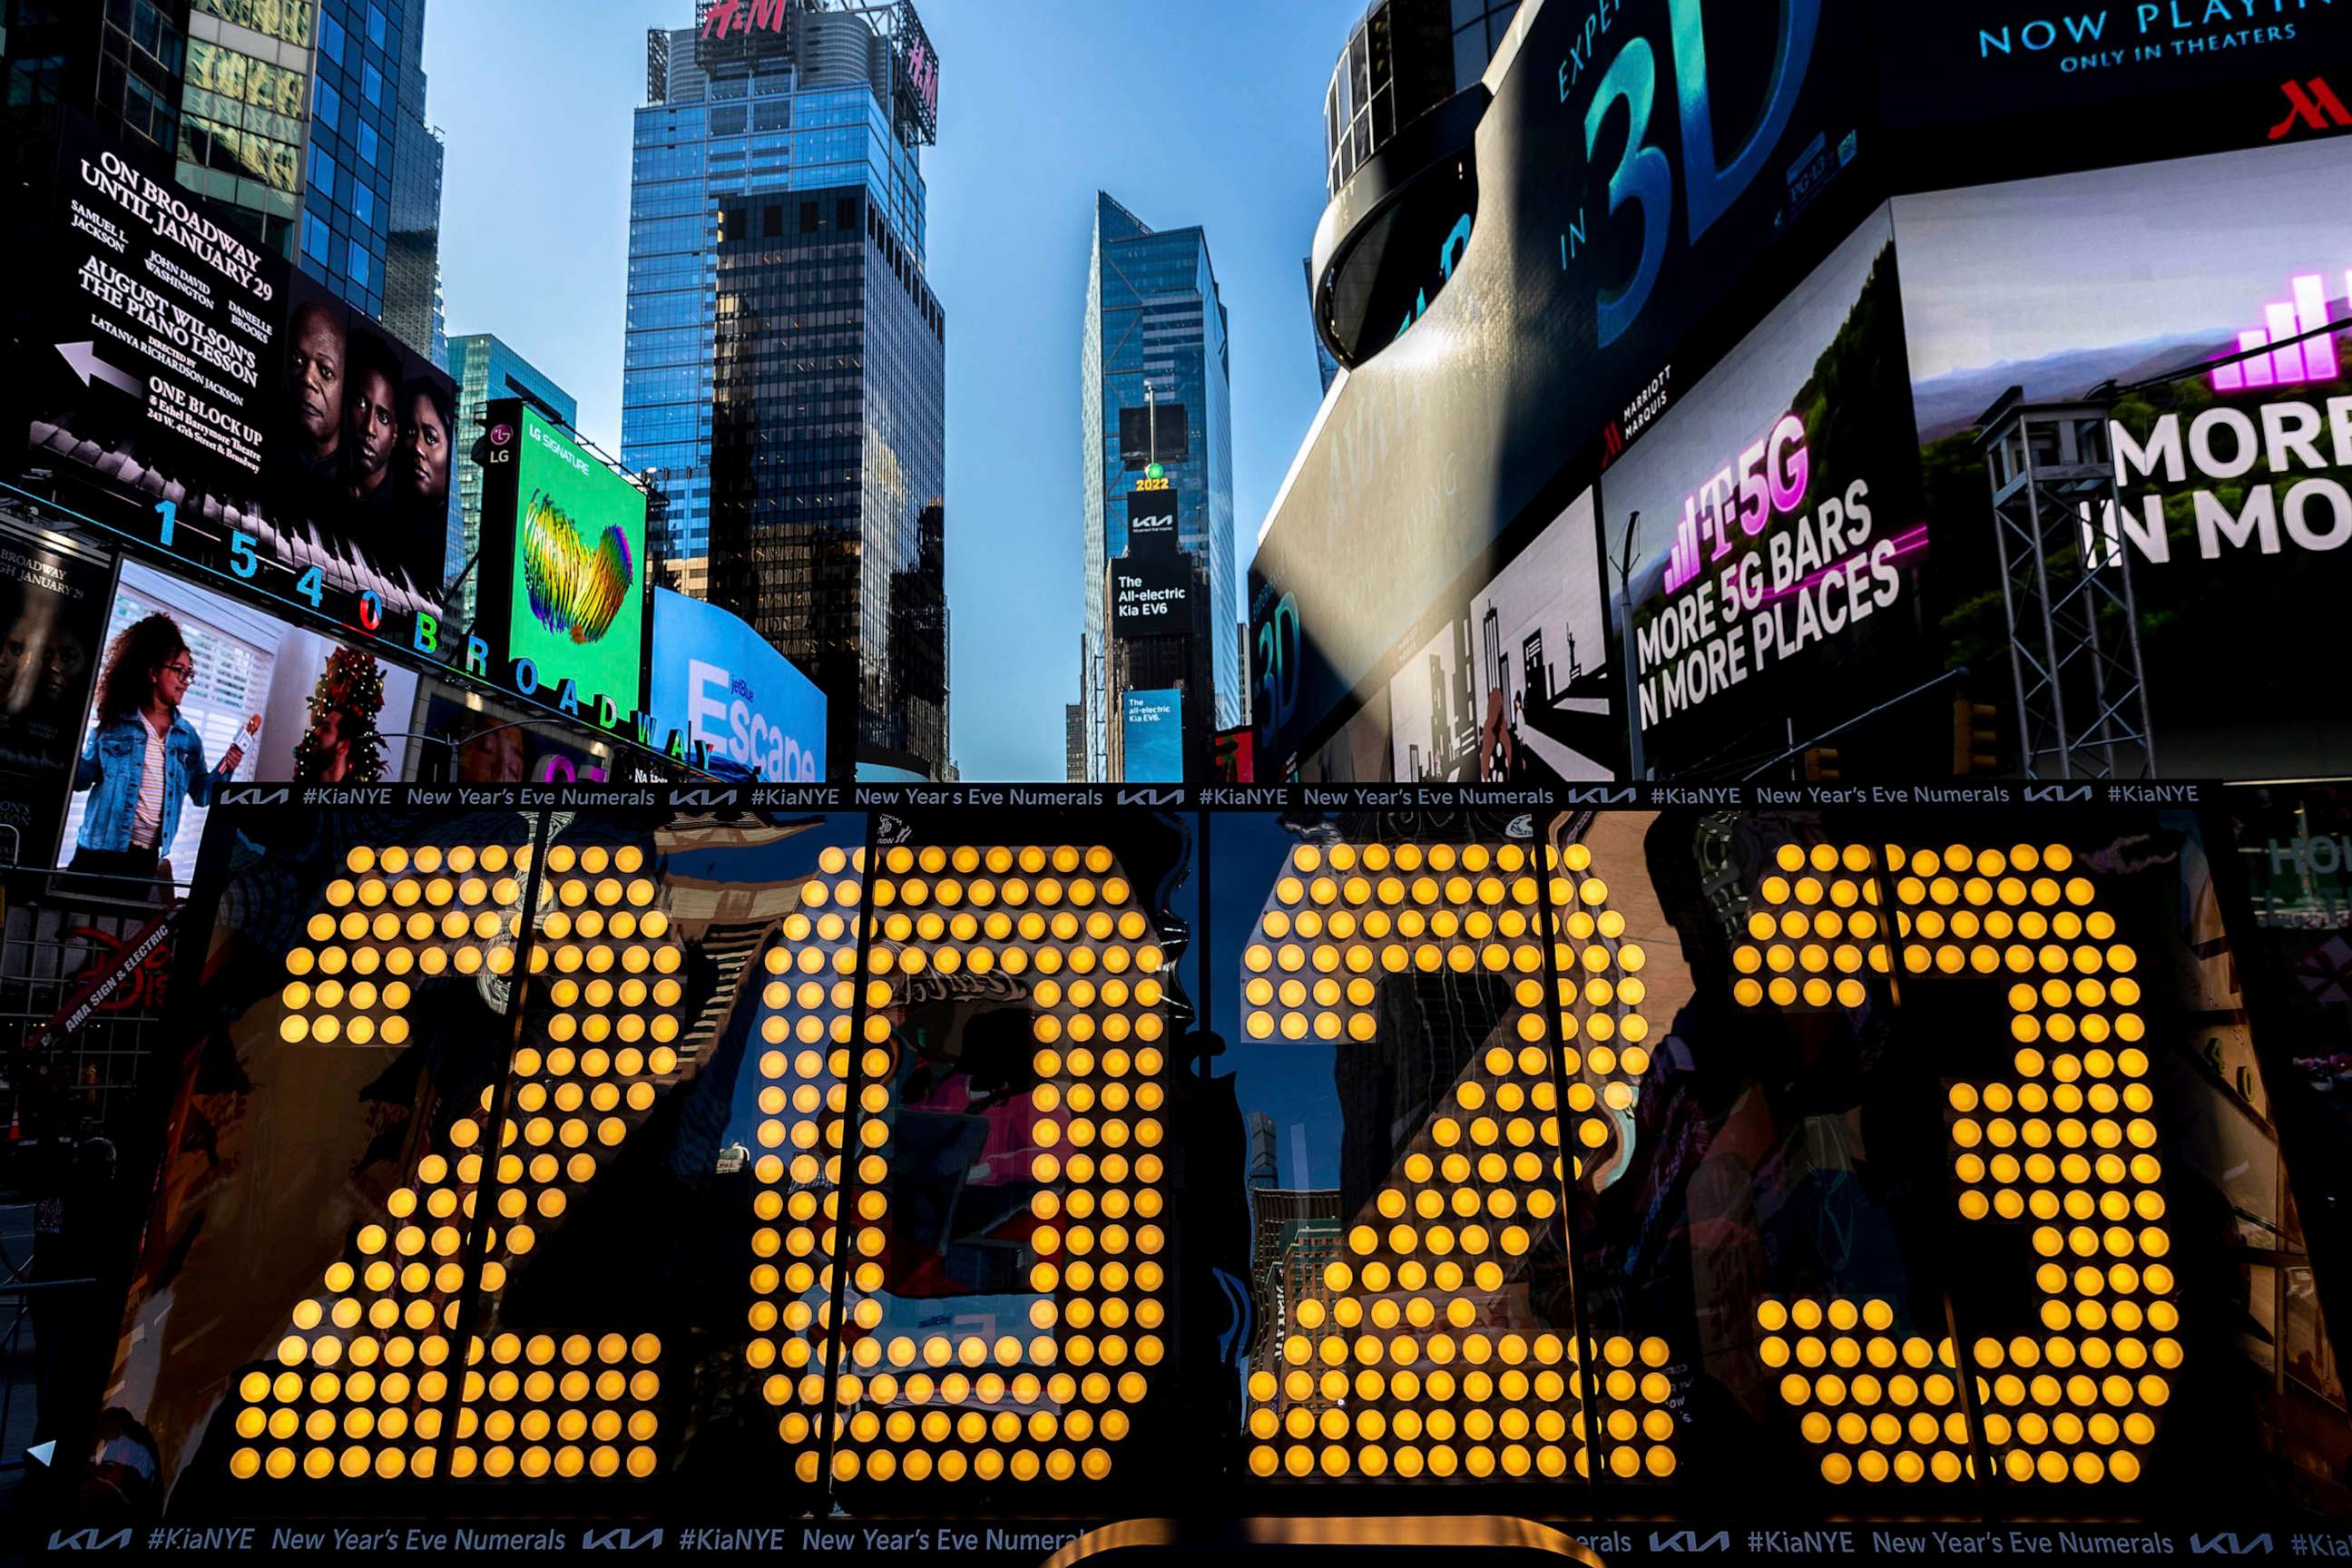 PHOTO: The 2023 New Year's Eve numerals are displayed in Times Square, Dec. 20, 2022, in New York.